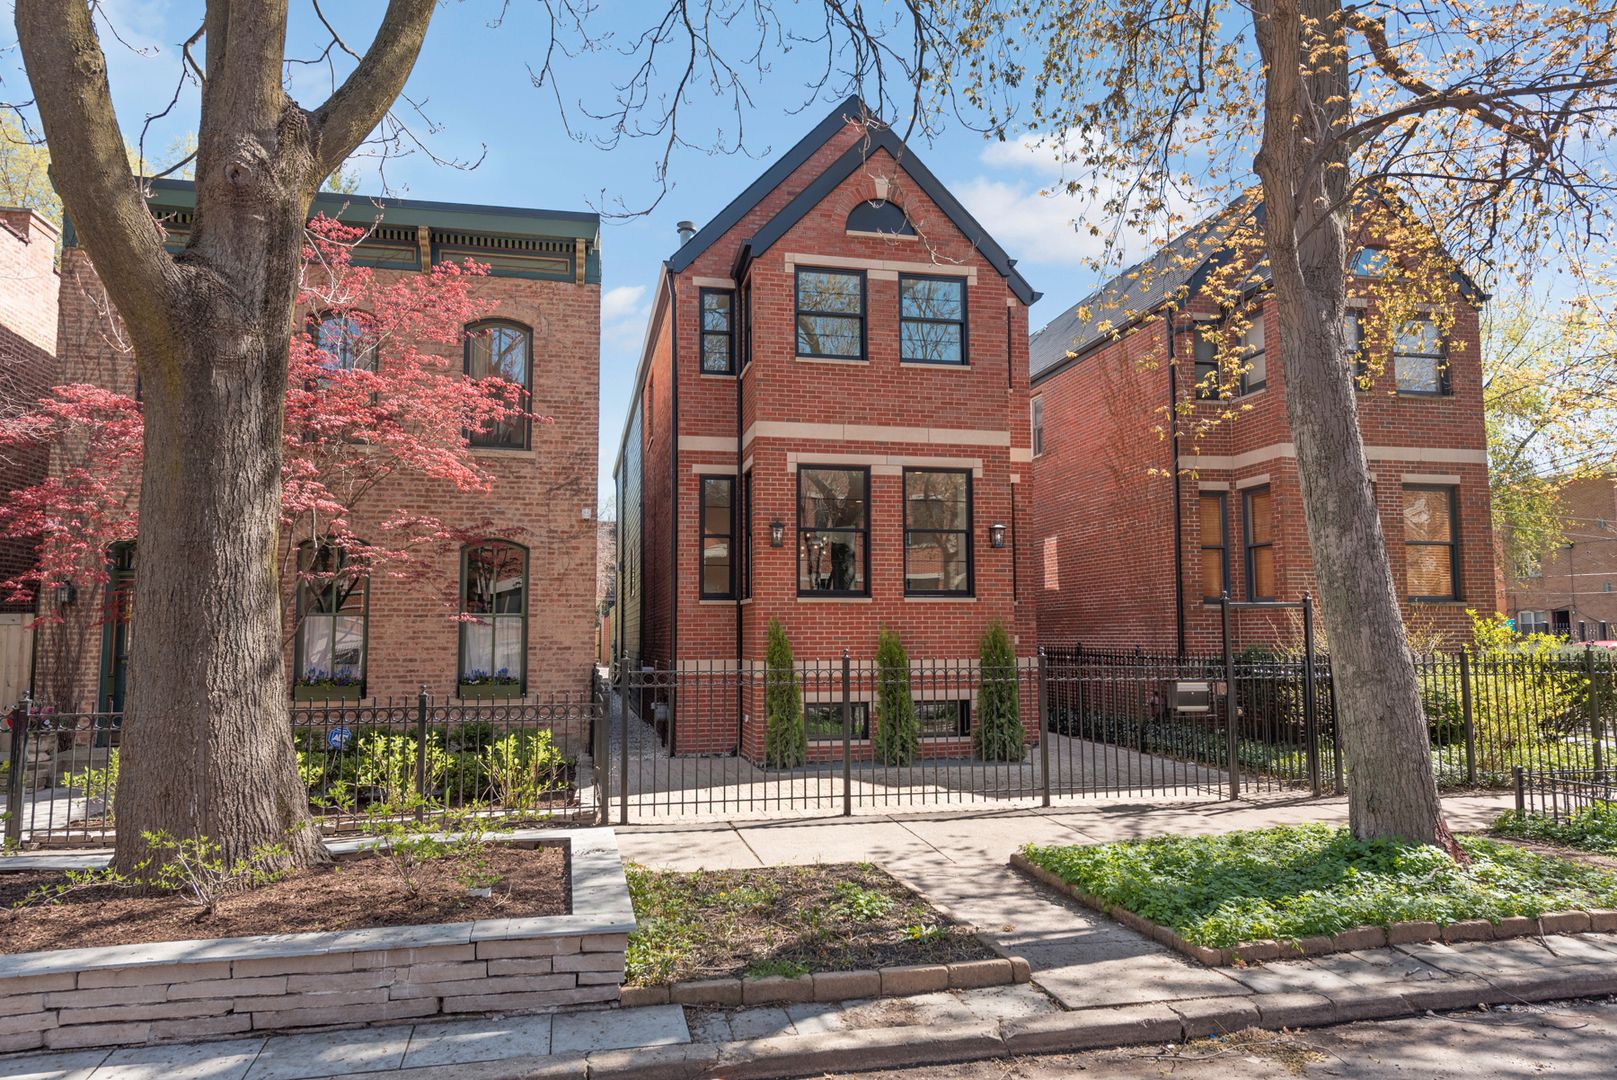 Main Photo: 2139 W Schiller Street in Chicago: CHI - West Town Residential for sale ()  : MLS®# 11420654